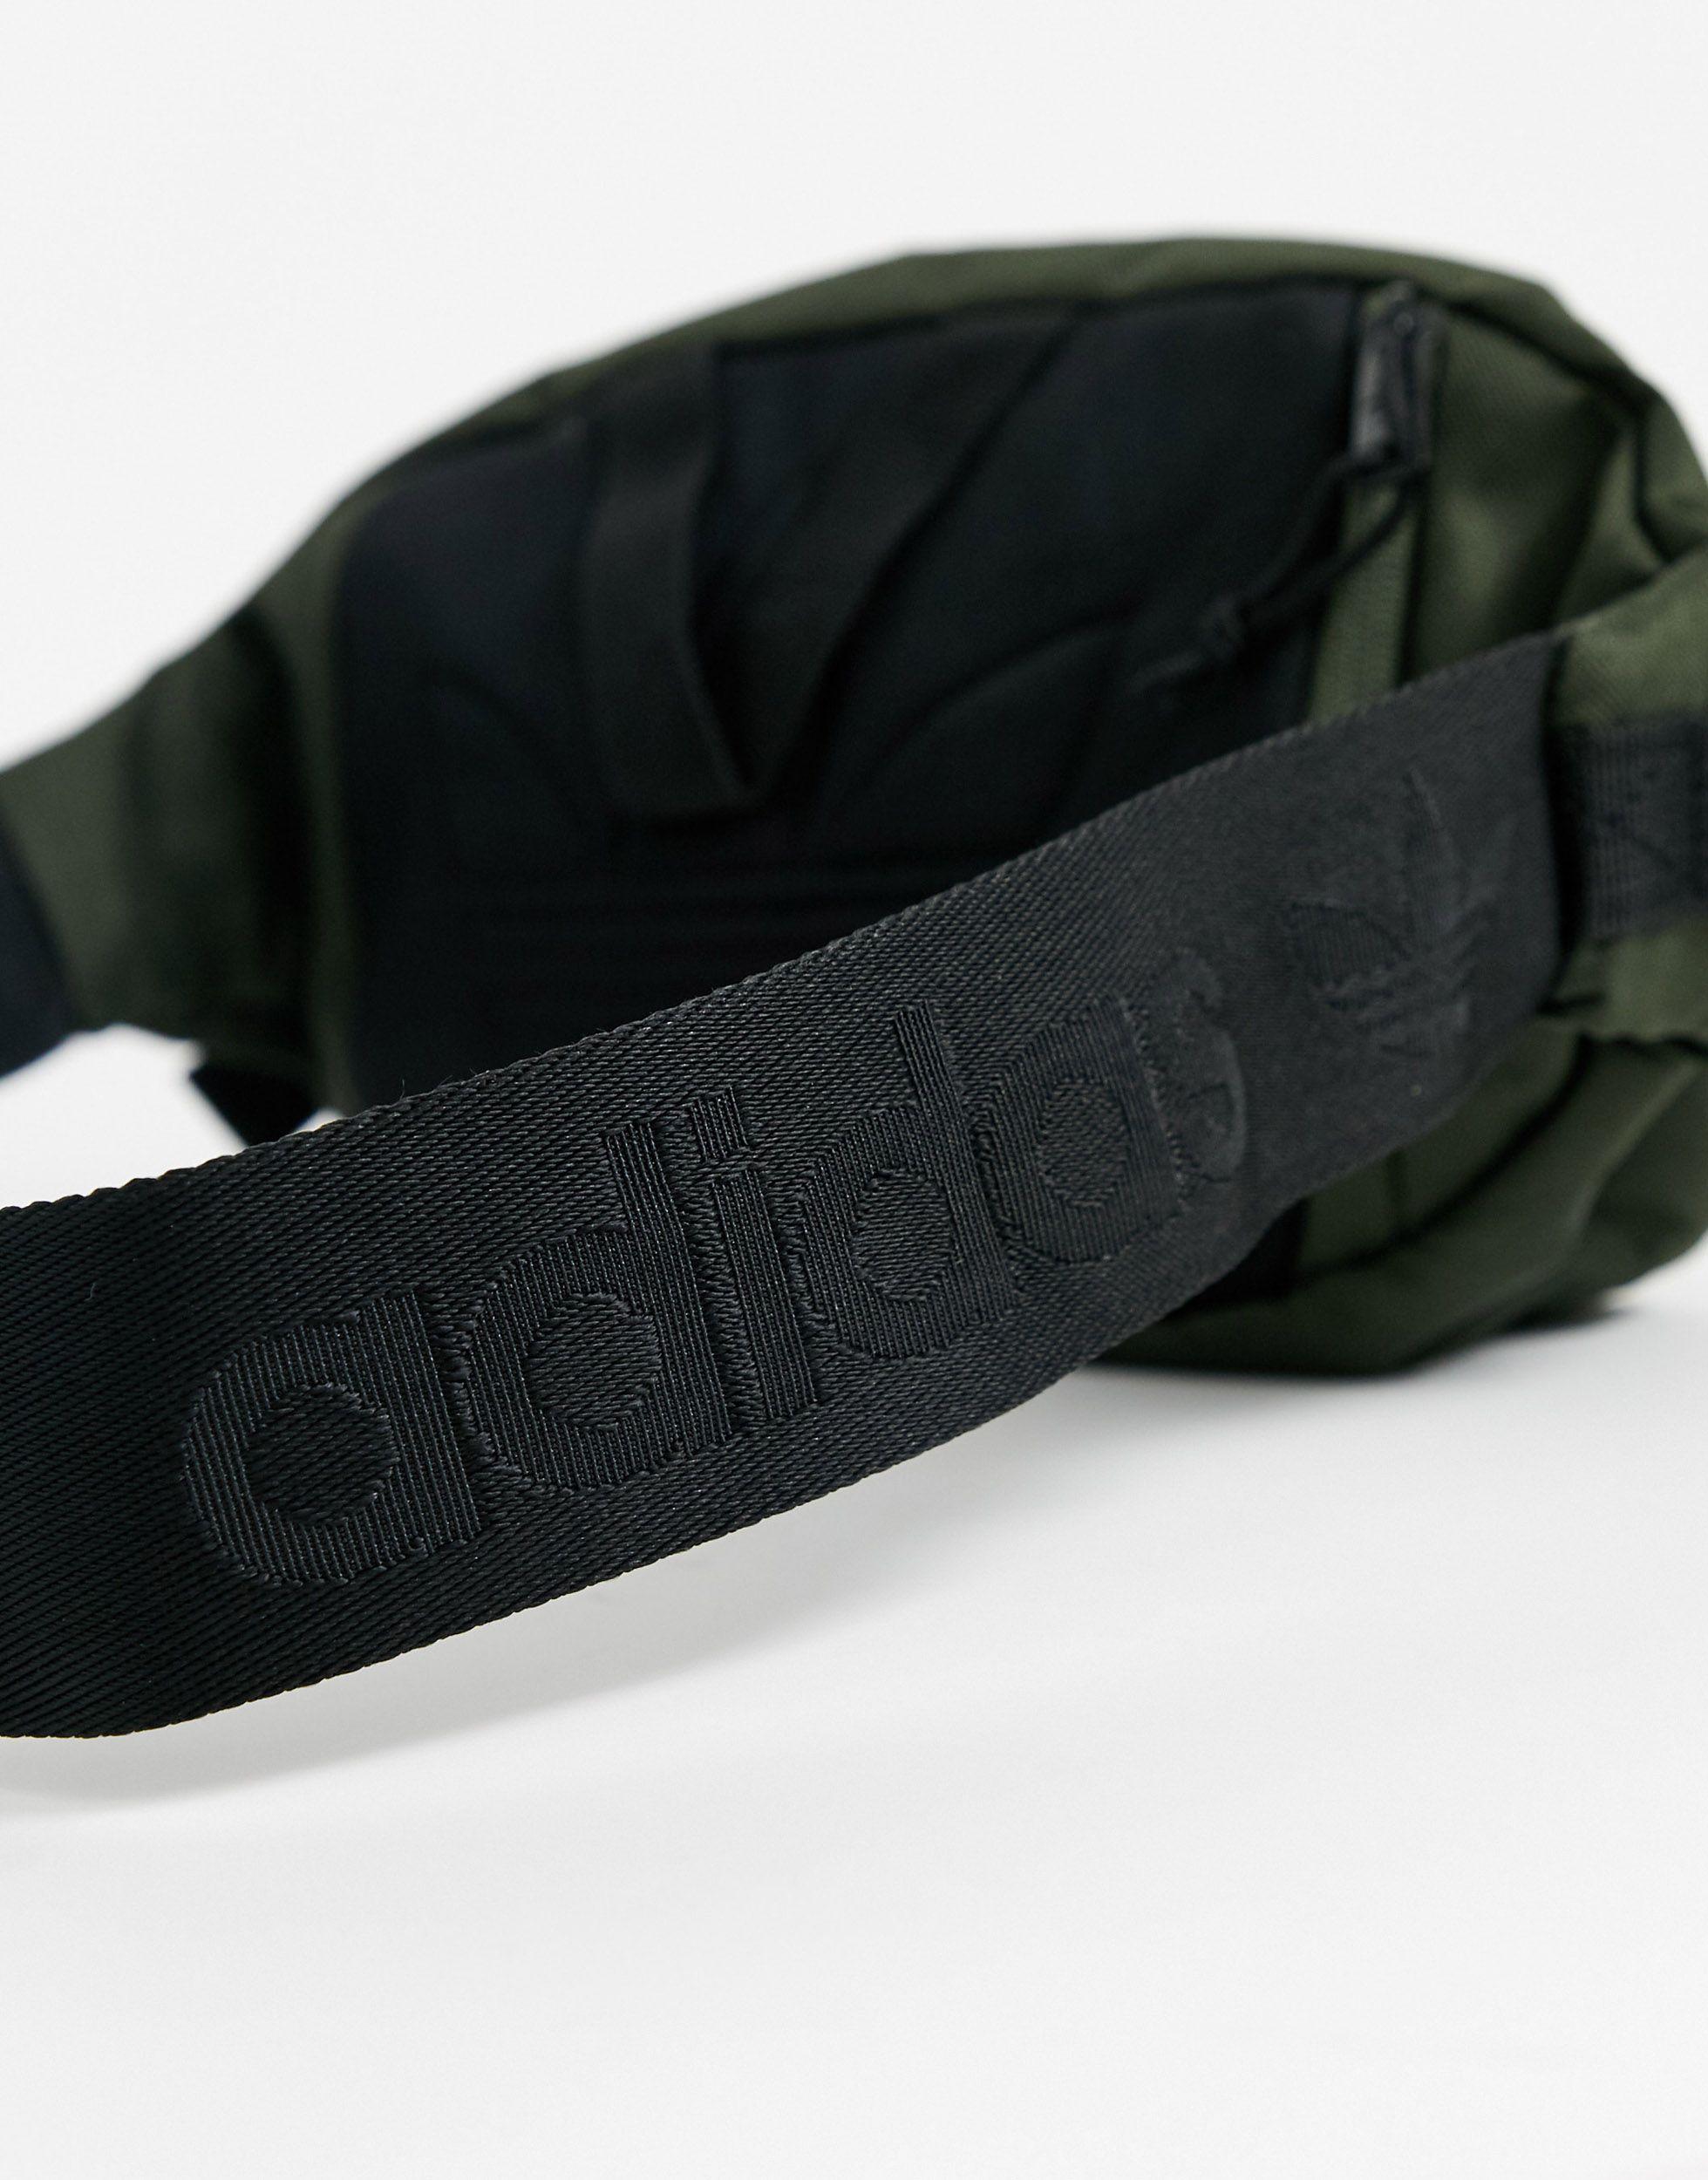 adidas Originals Fanny Pack With Vocal Logo in Green for Men